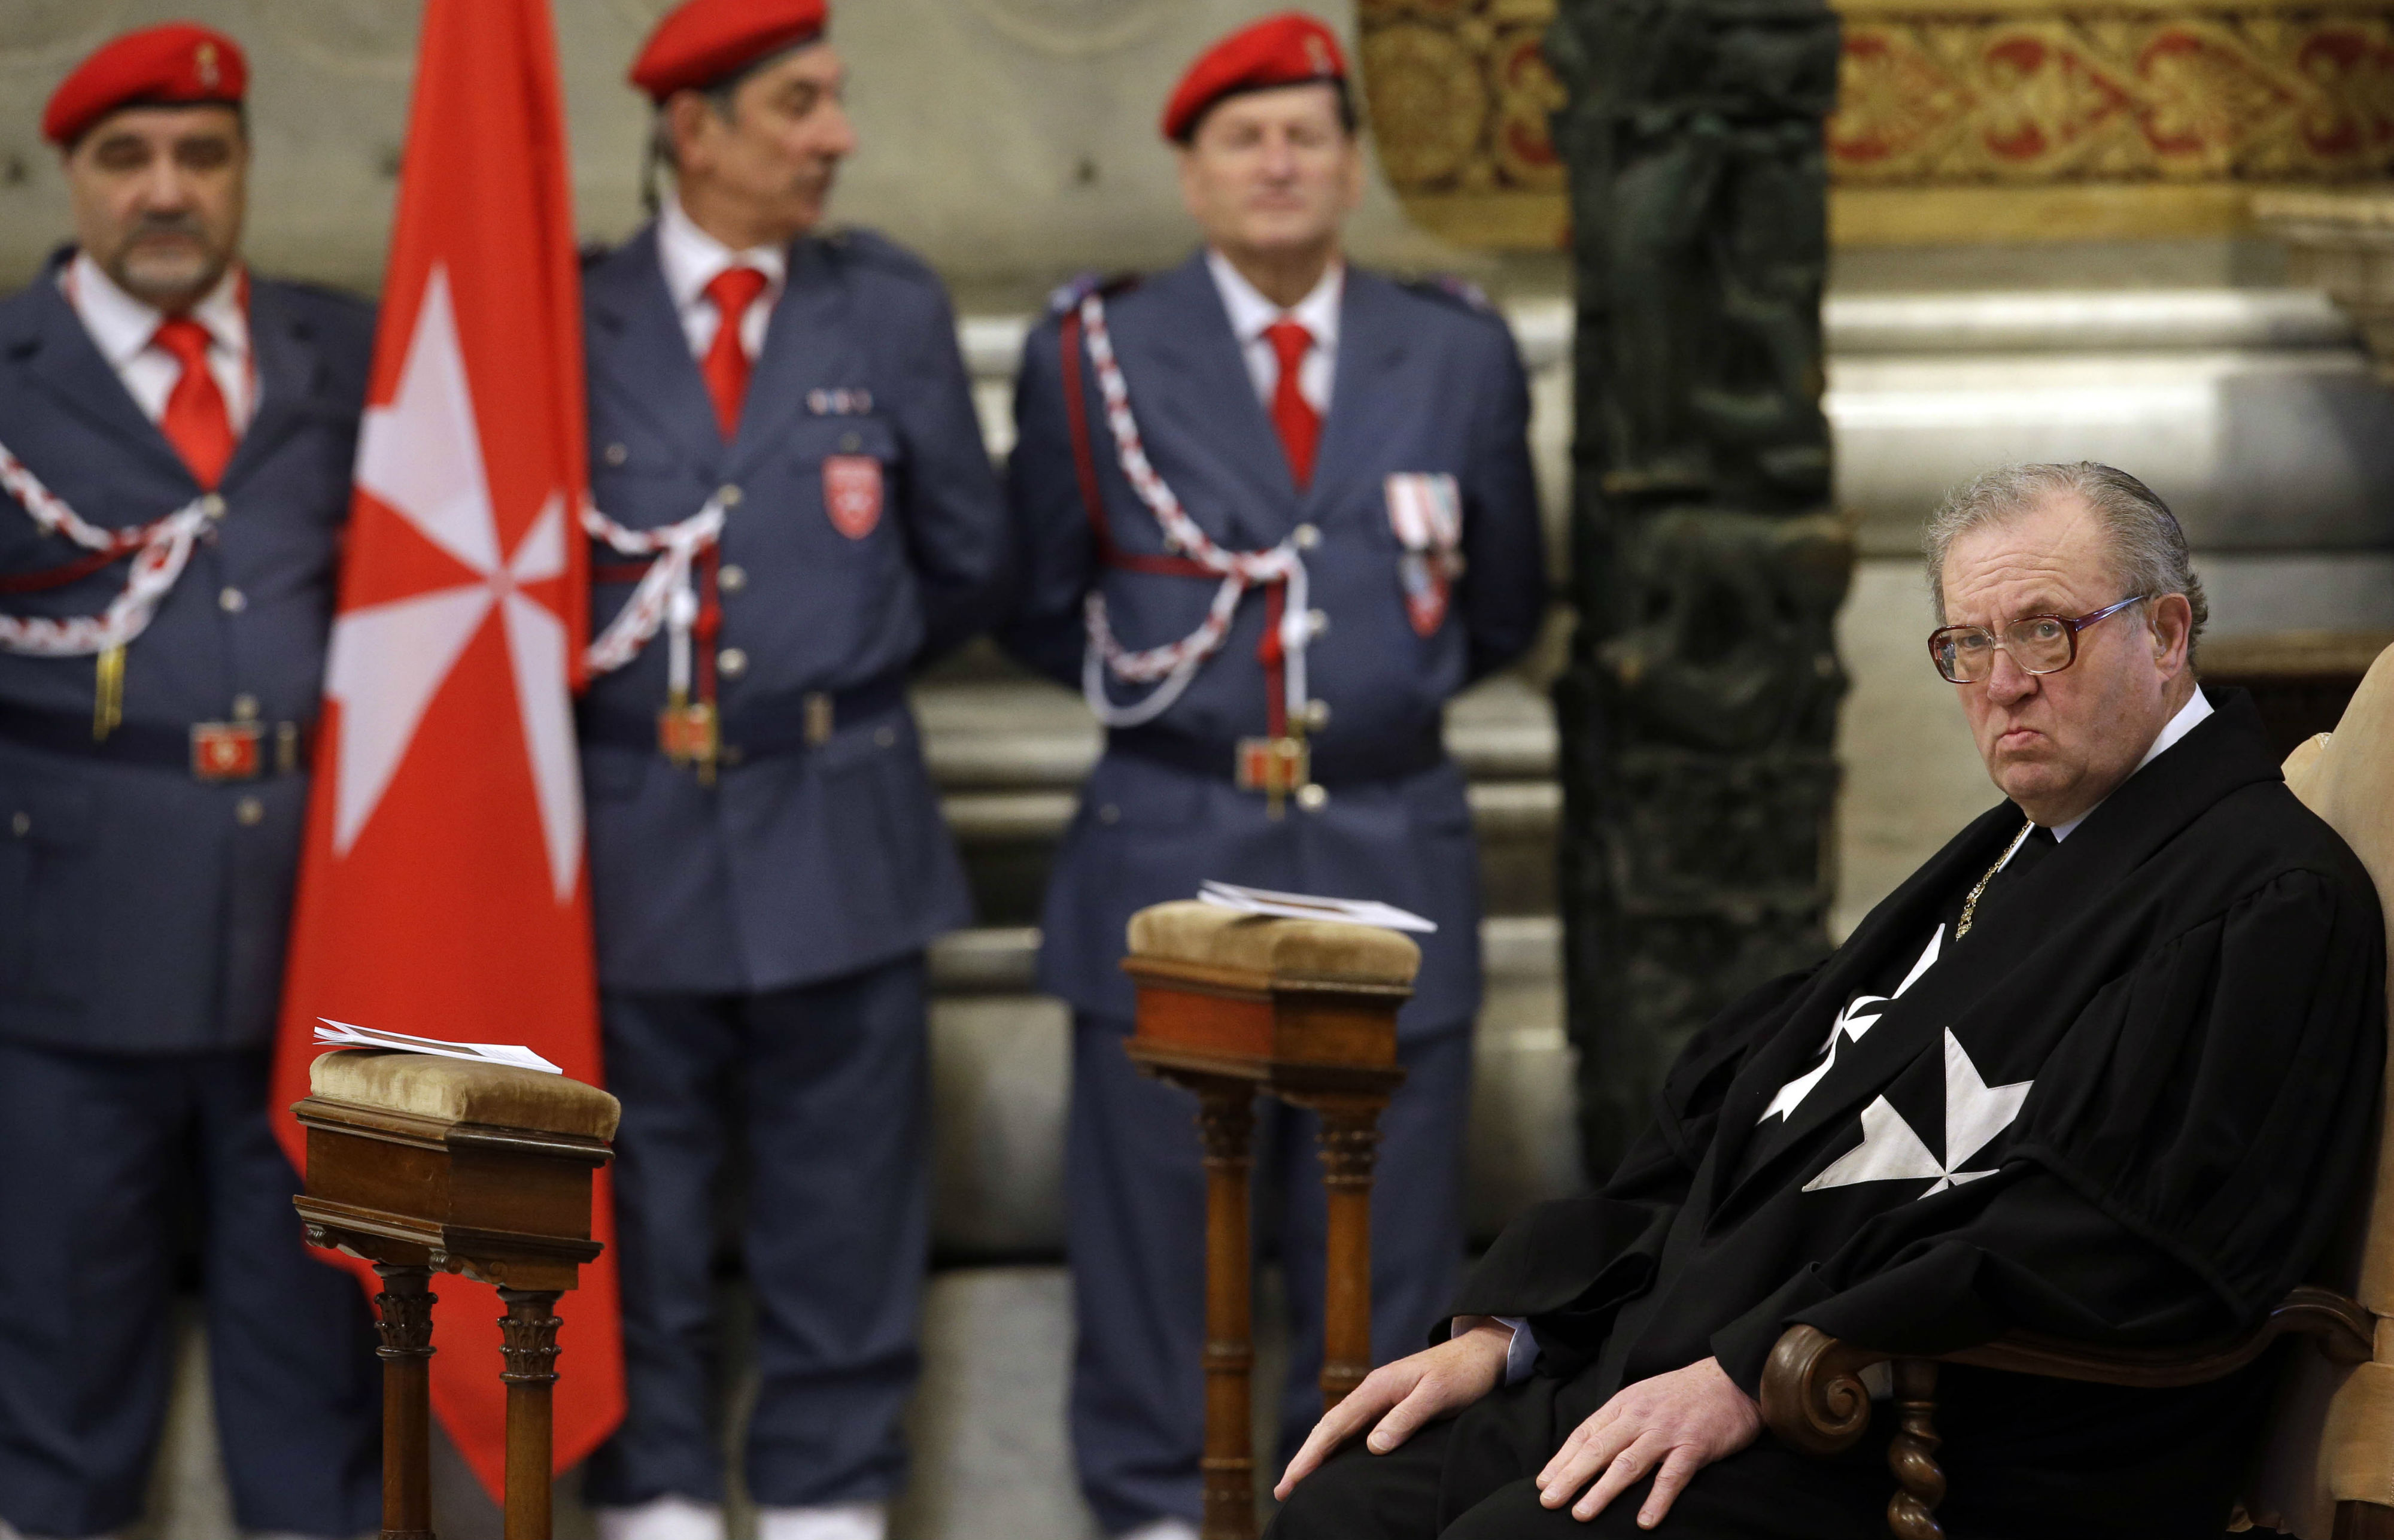 Matthew Festing ordered not to travel to Rome for Order of Malta election of his successor